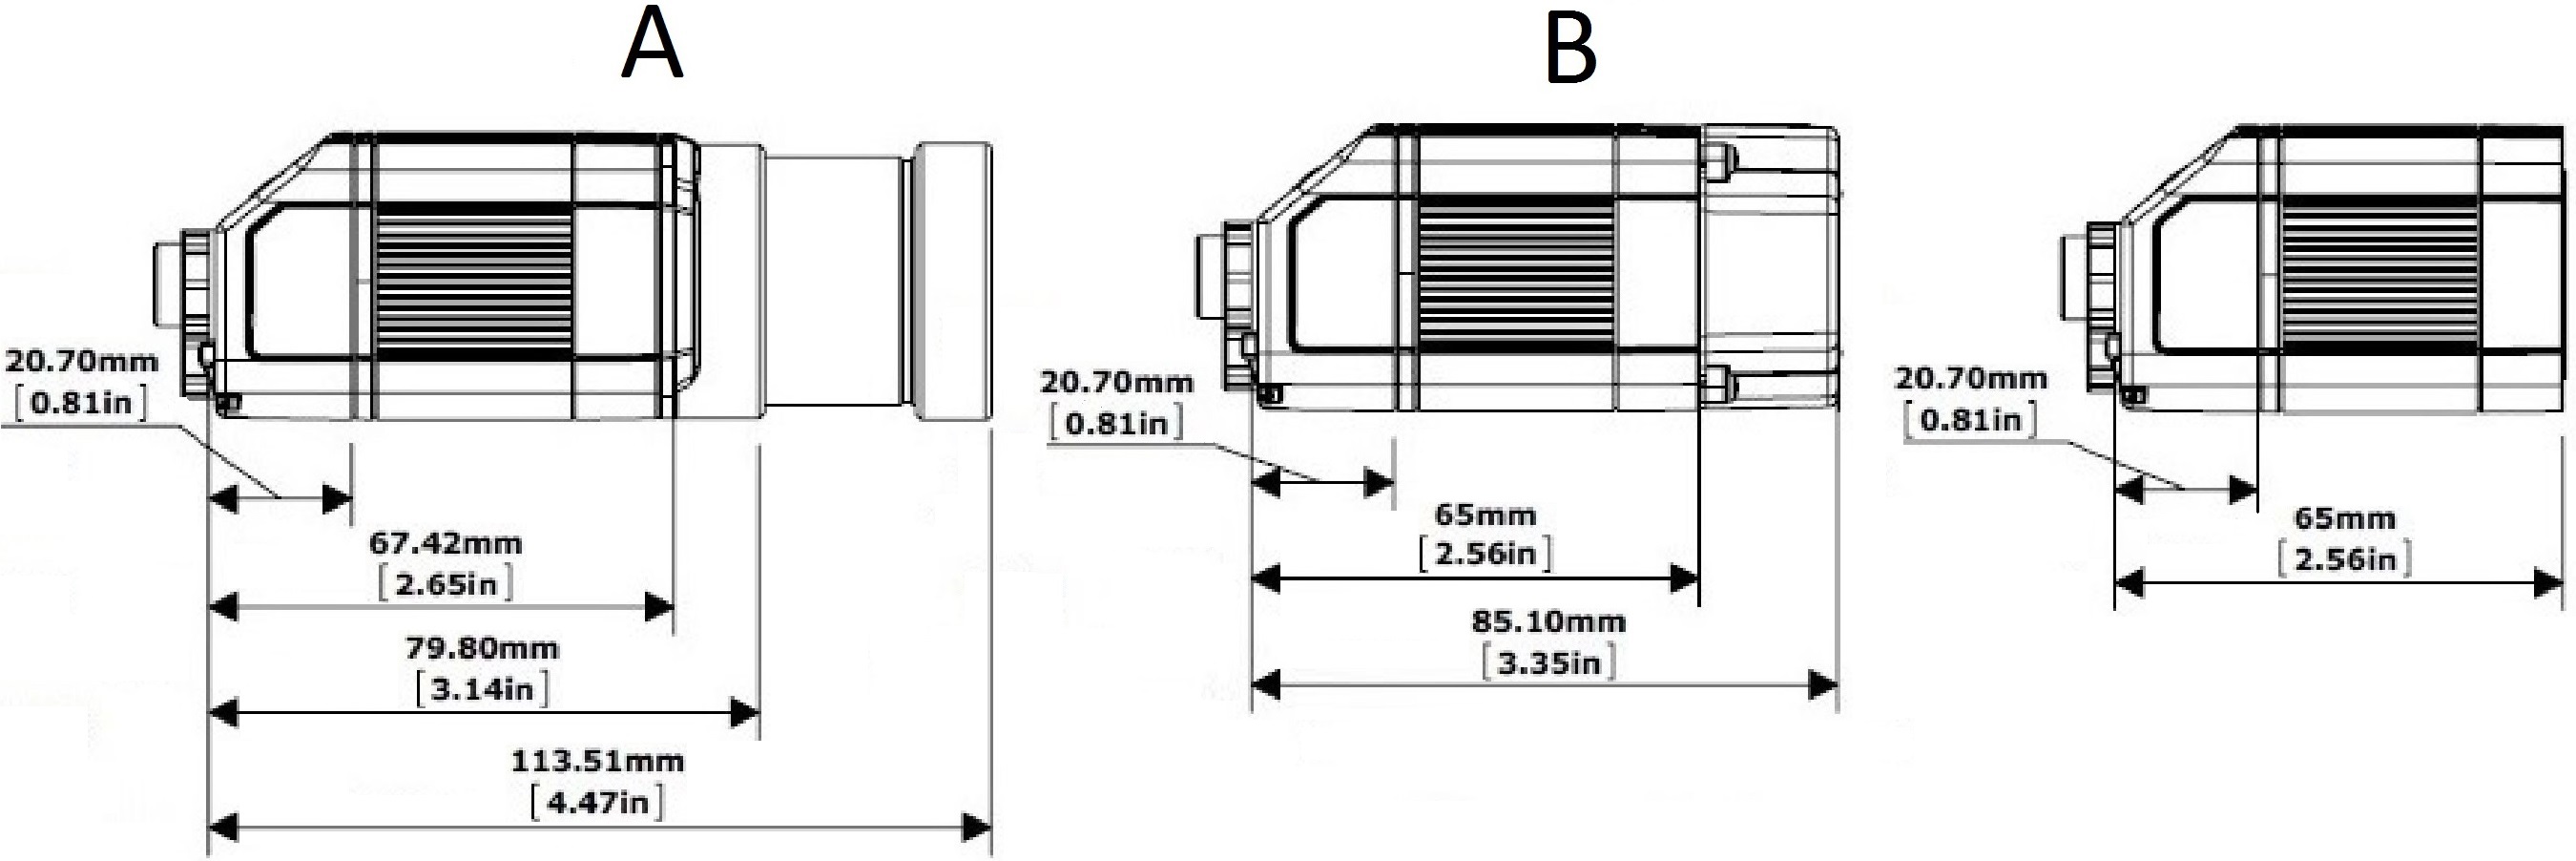 Dimensions of the DataMan 360 Series reader with and without lens options.